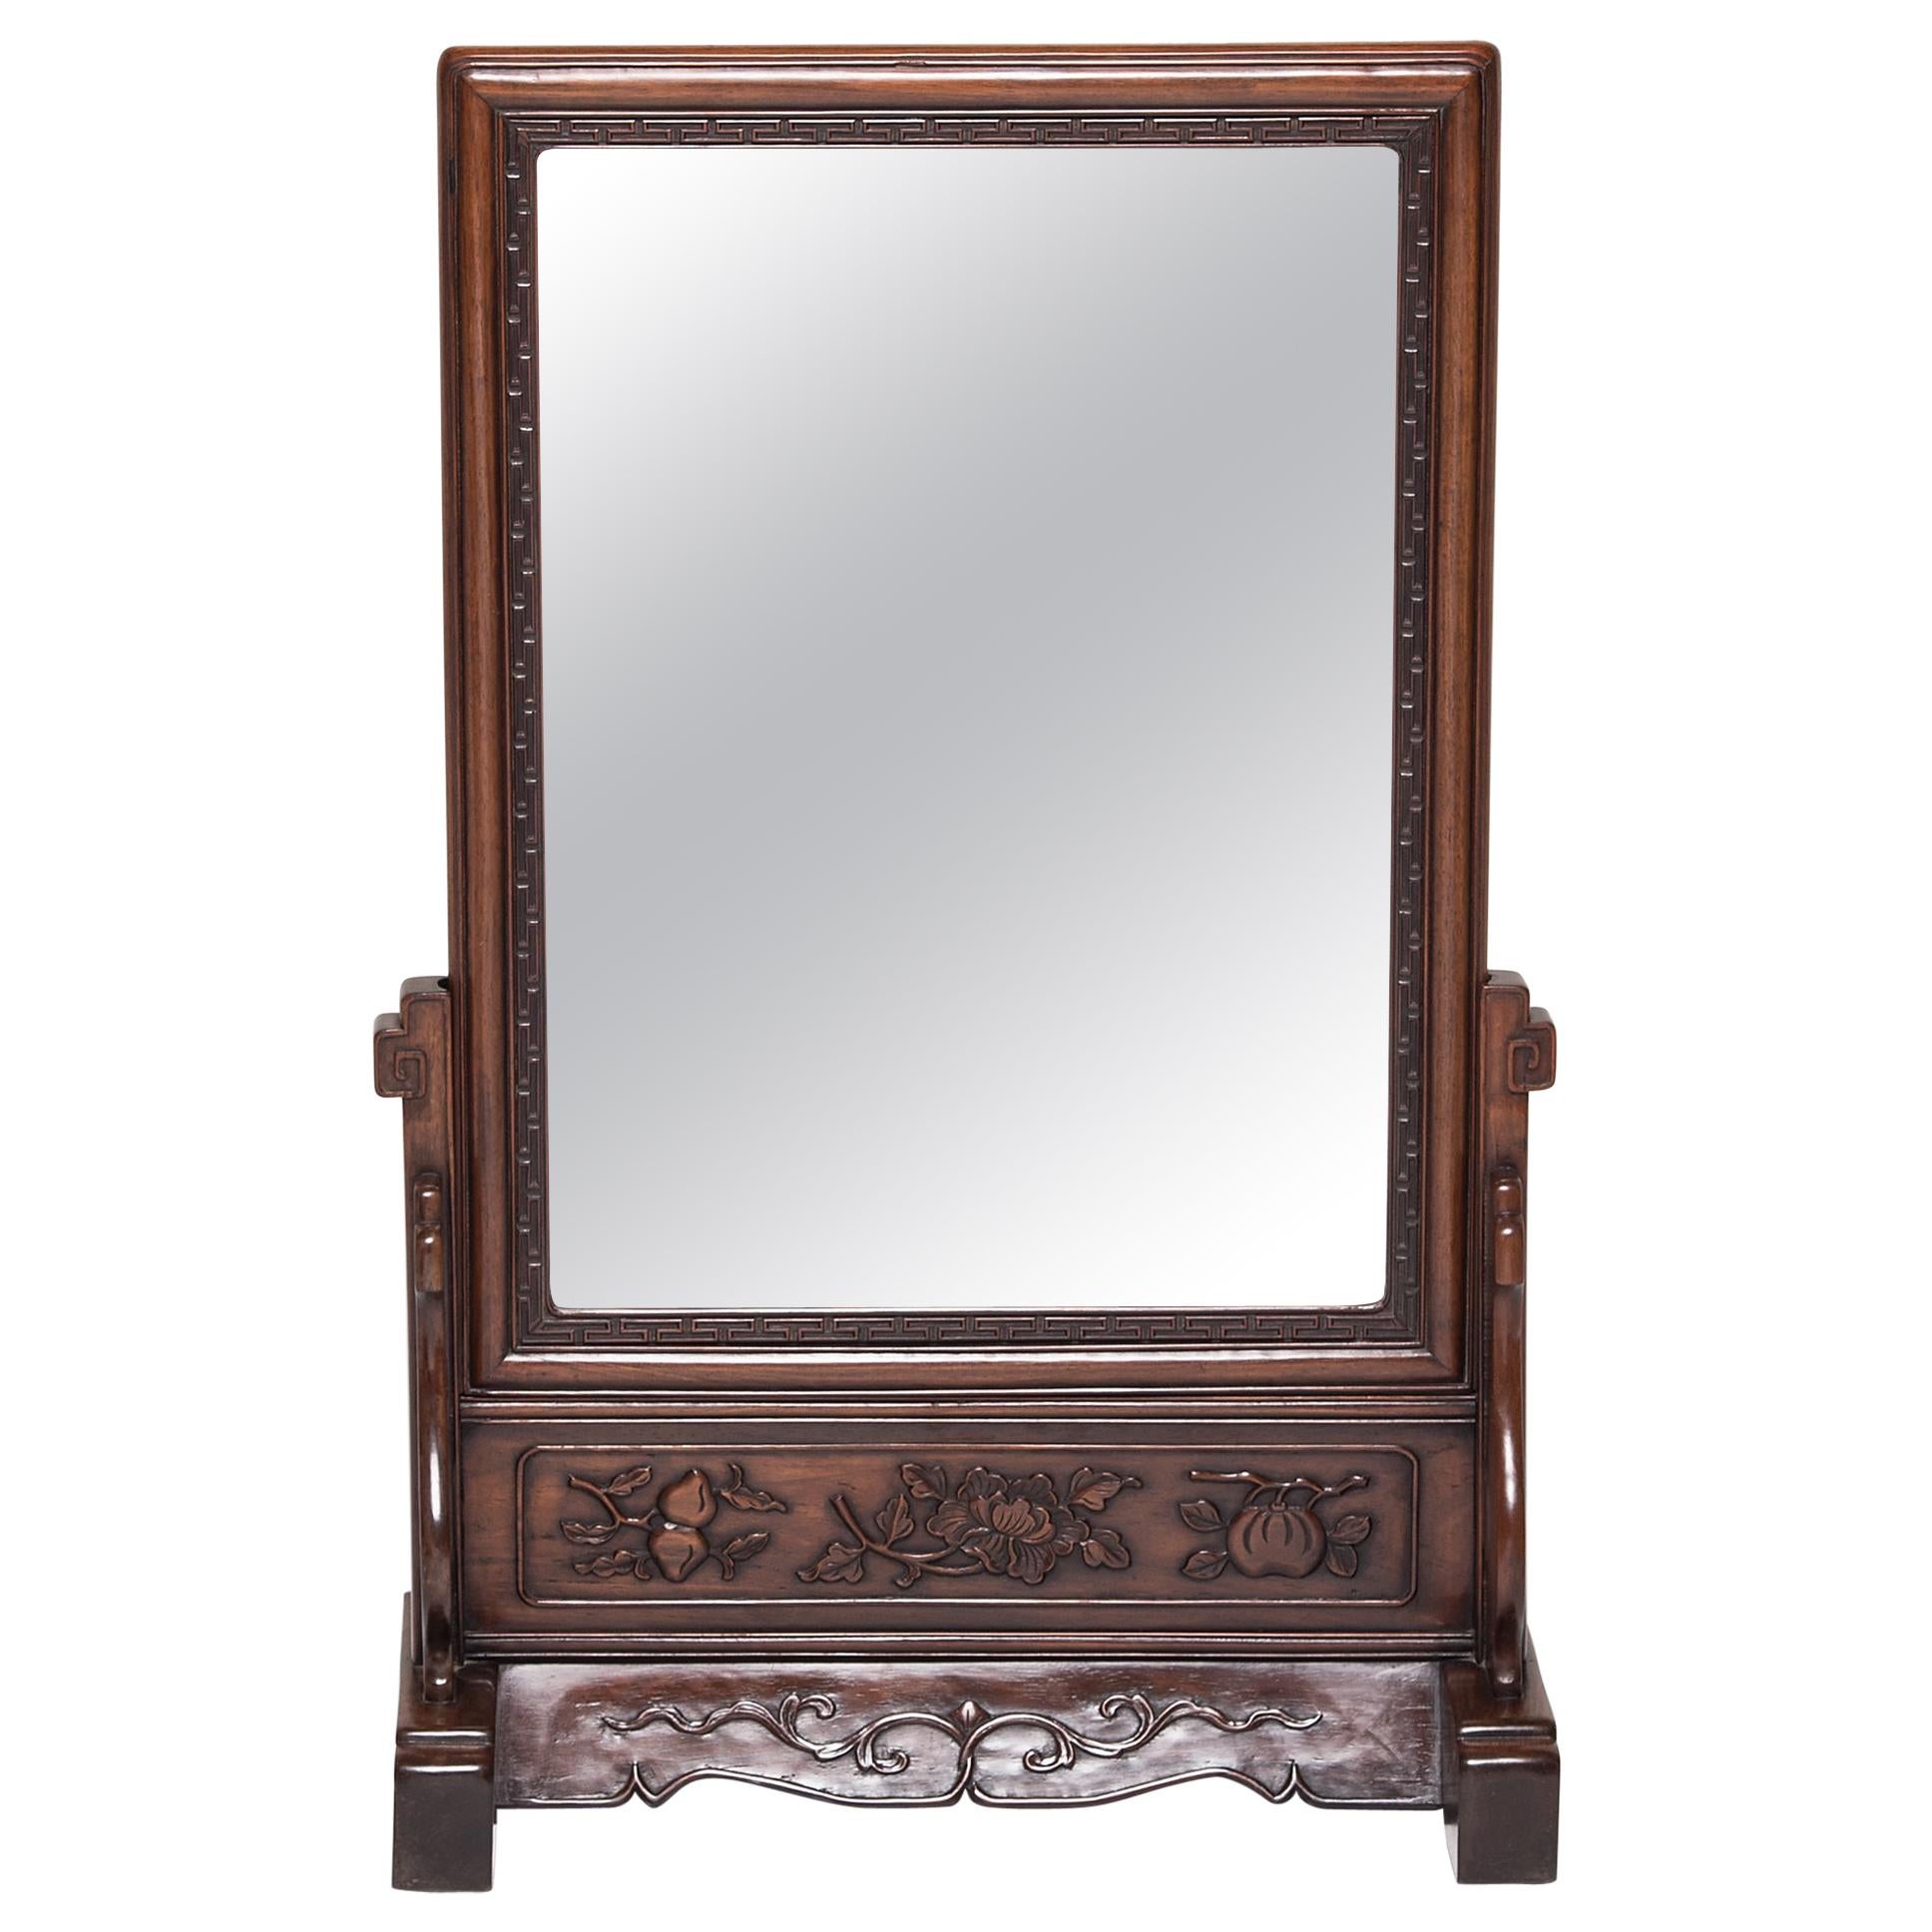 Chinese Table Screen Mirror, c. 1850 For Sale